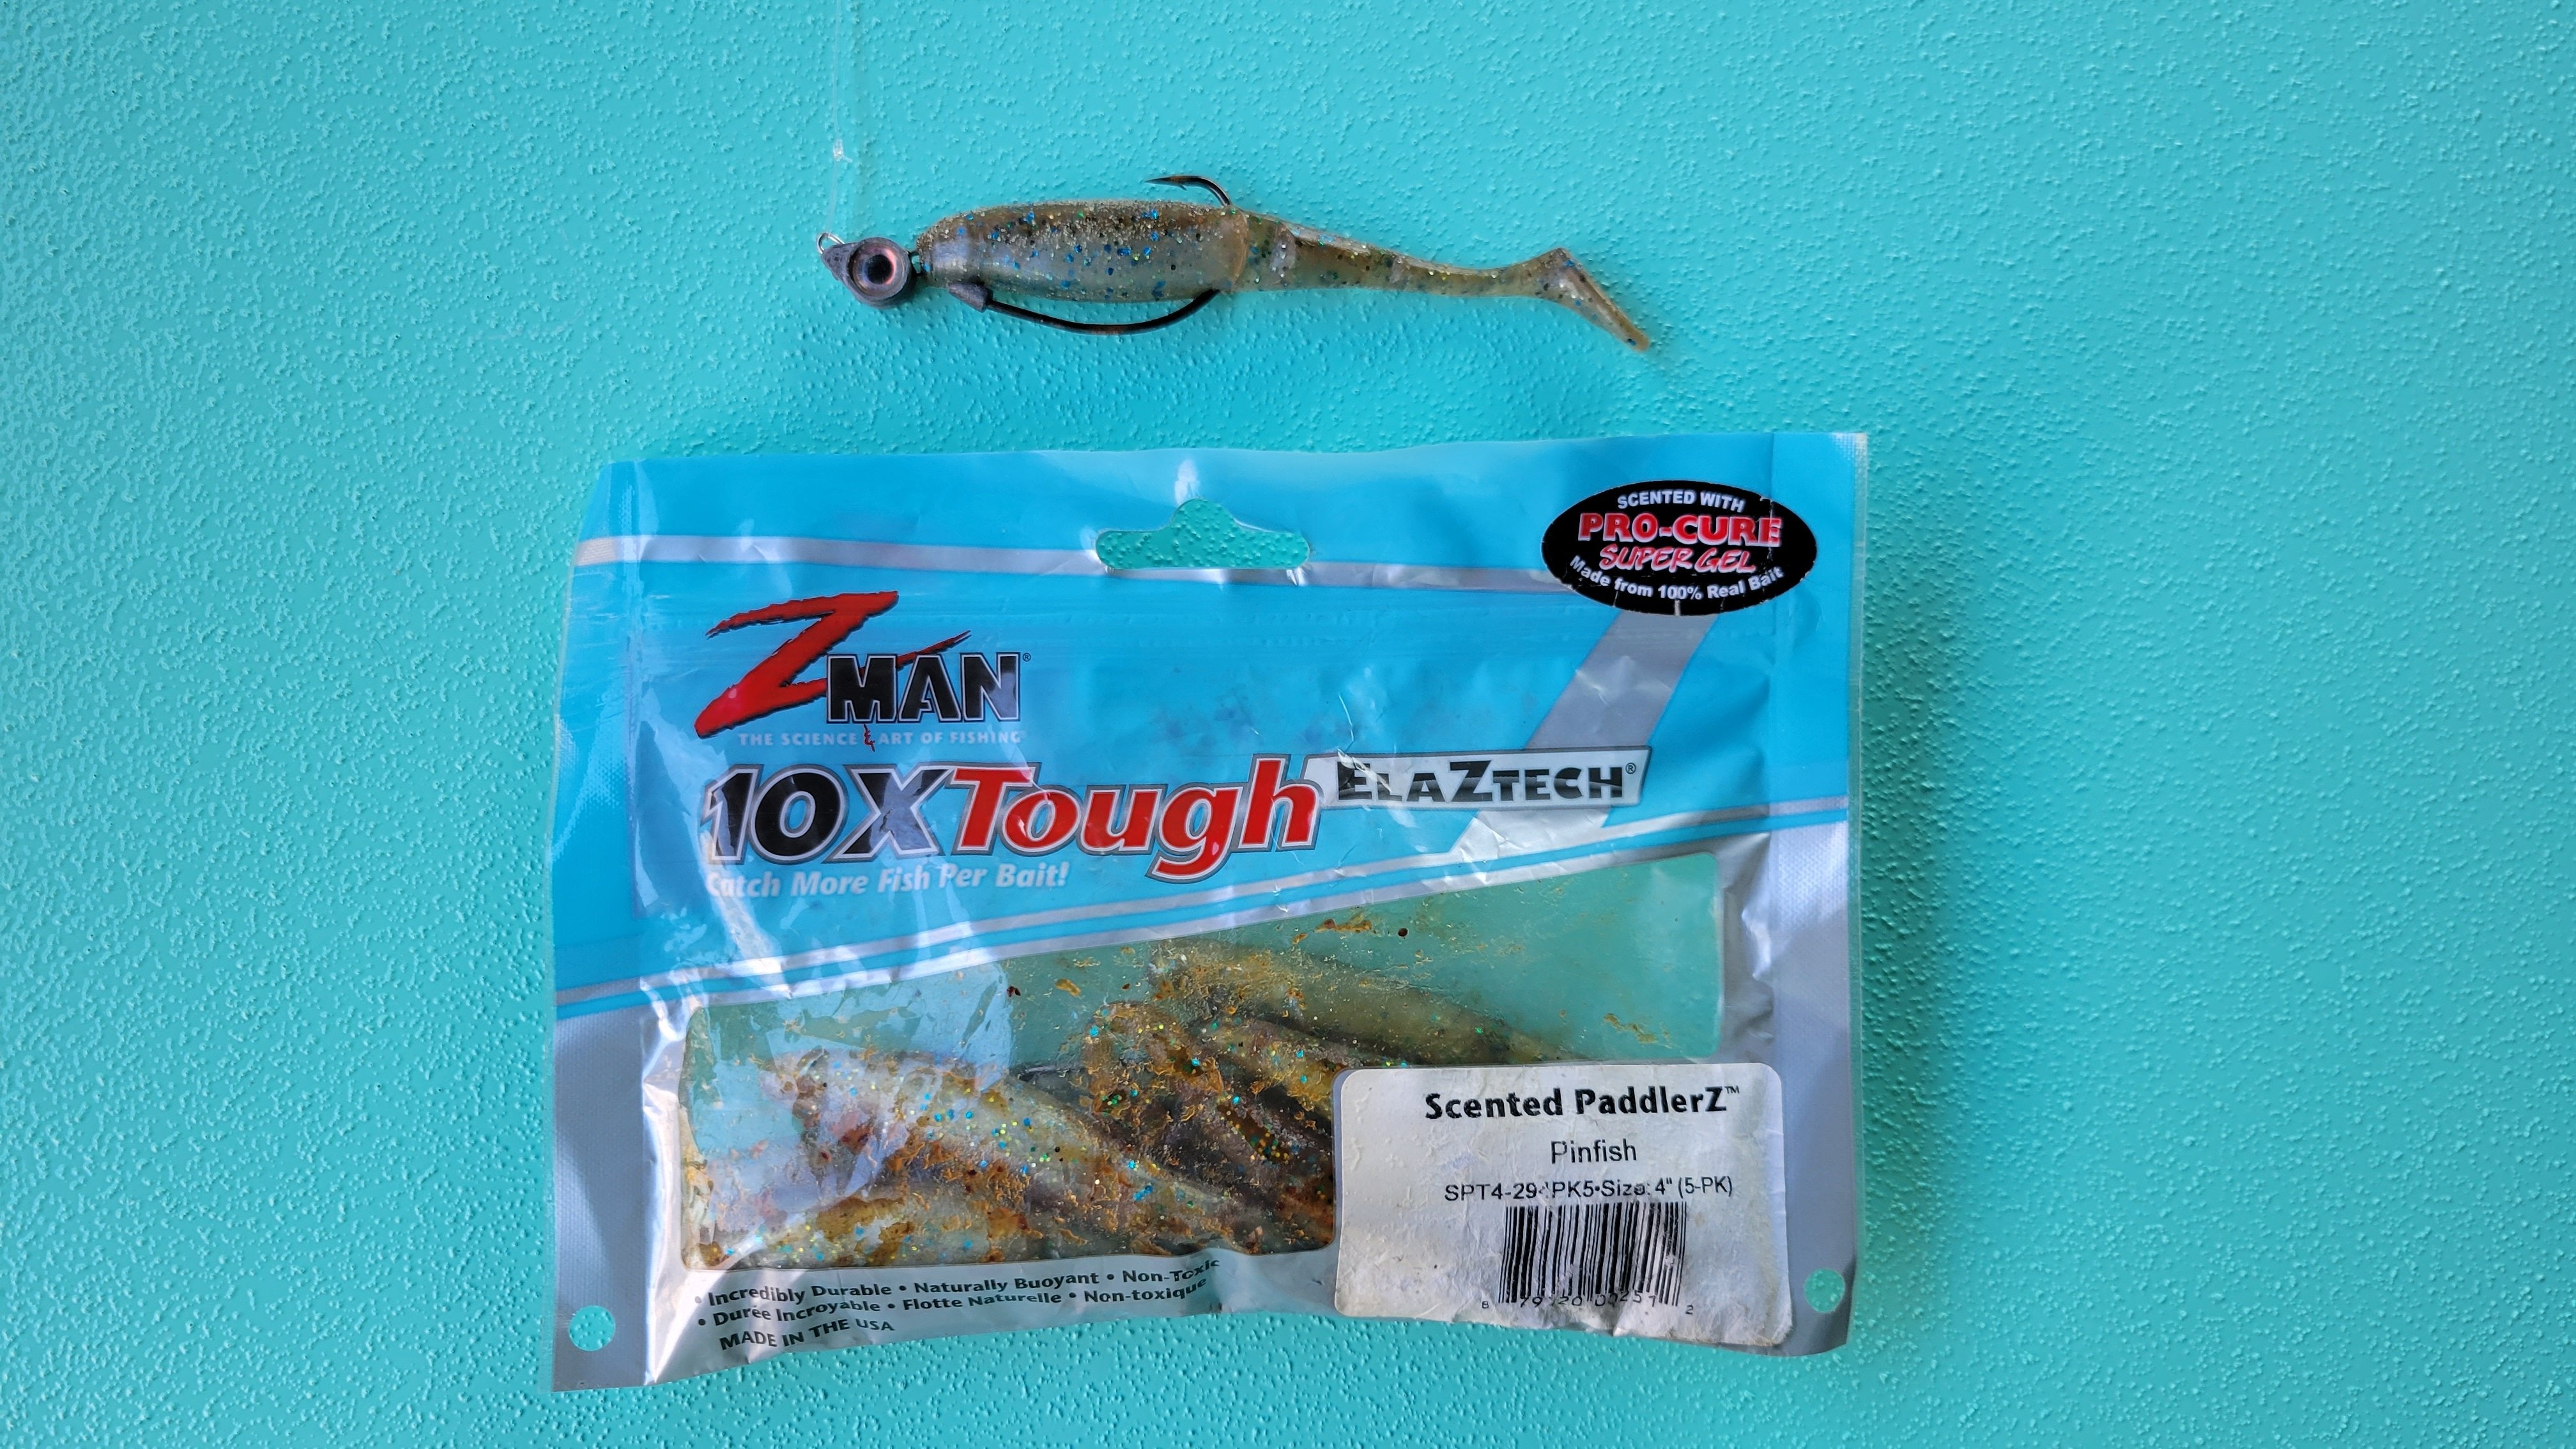 All time favorite Red fish lure whats yours?